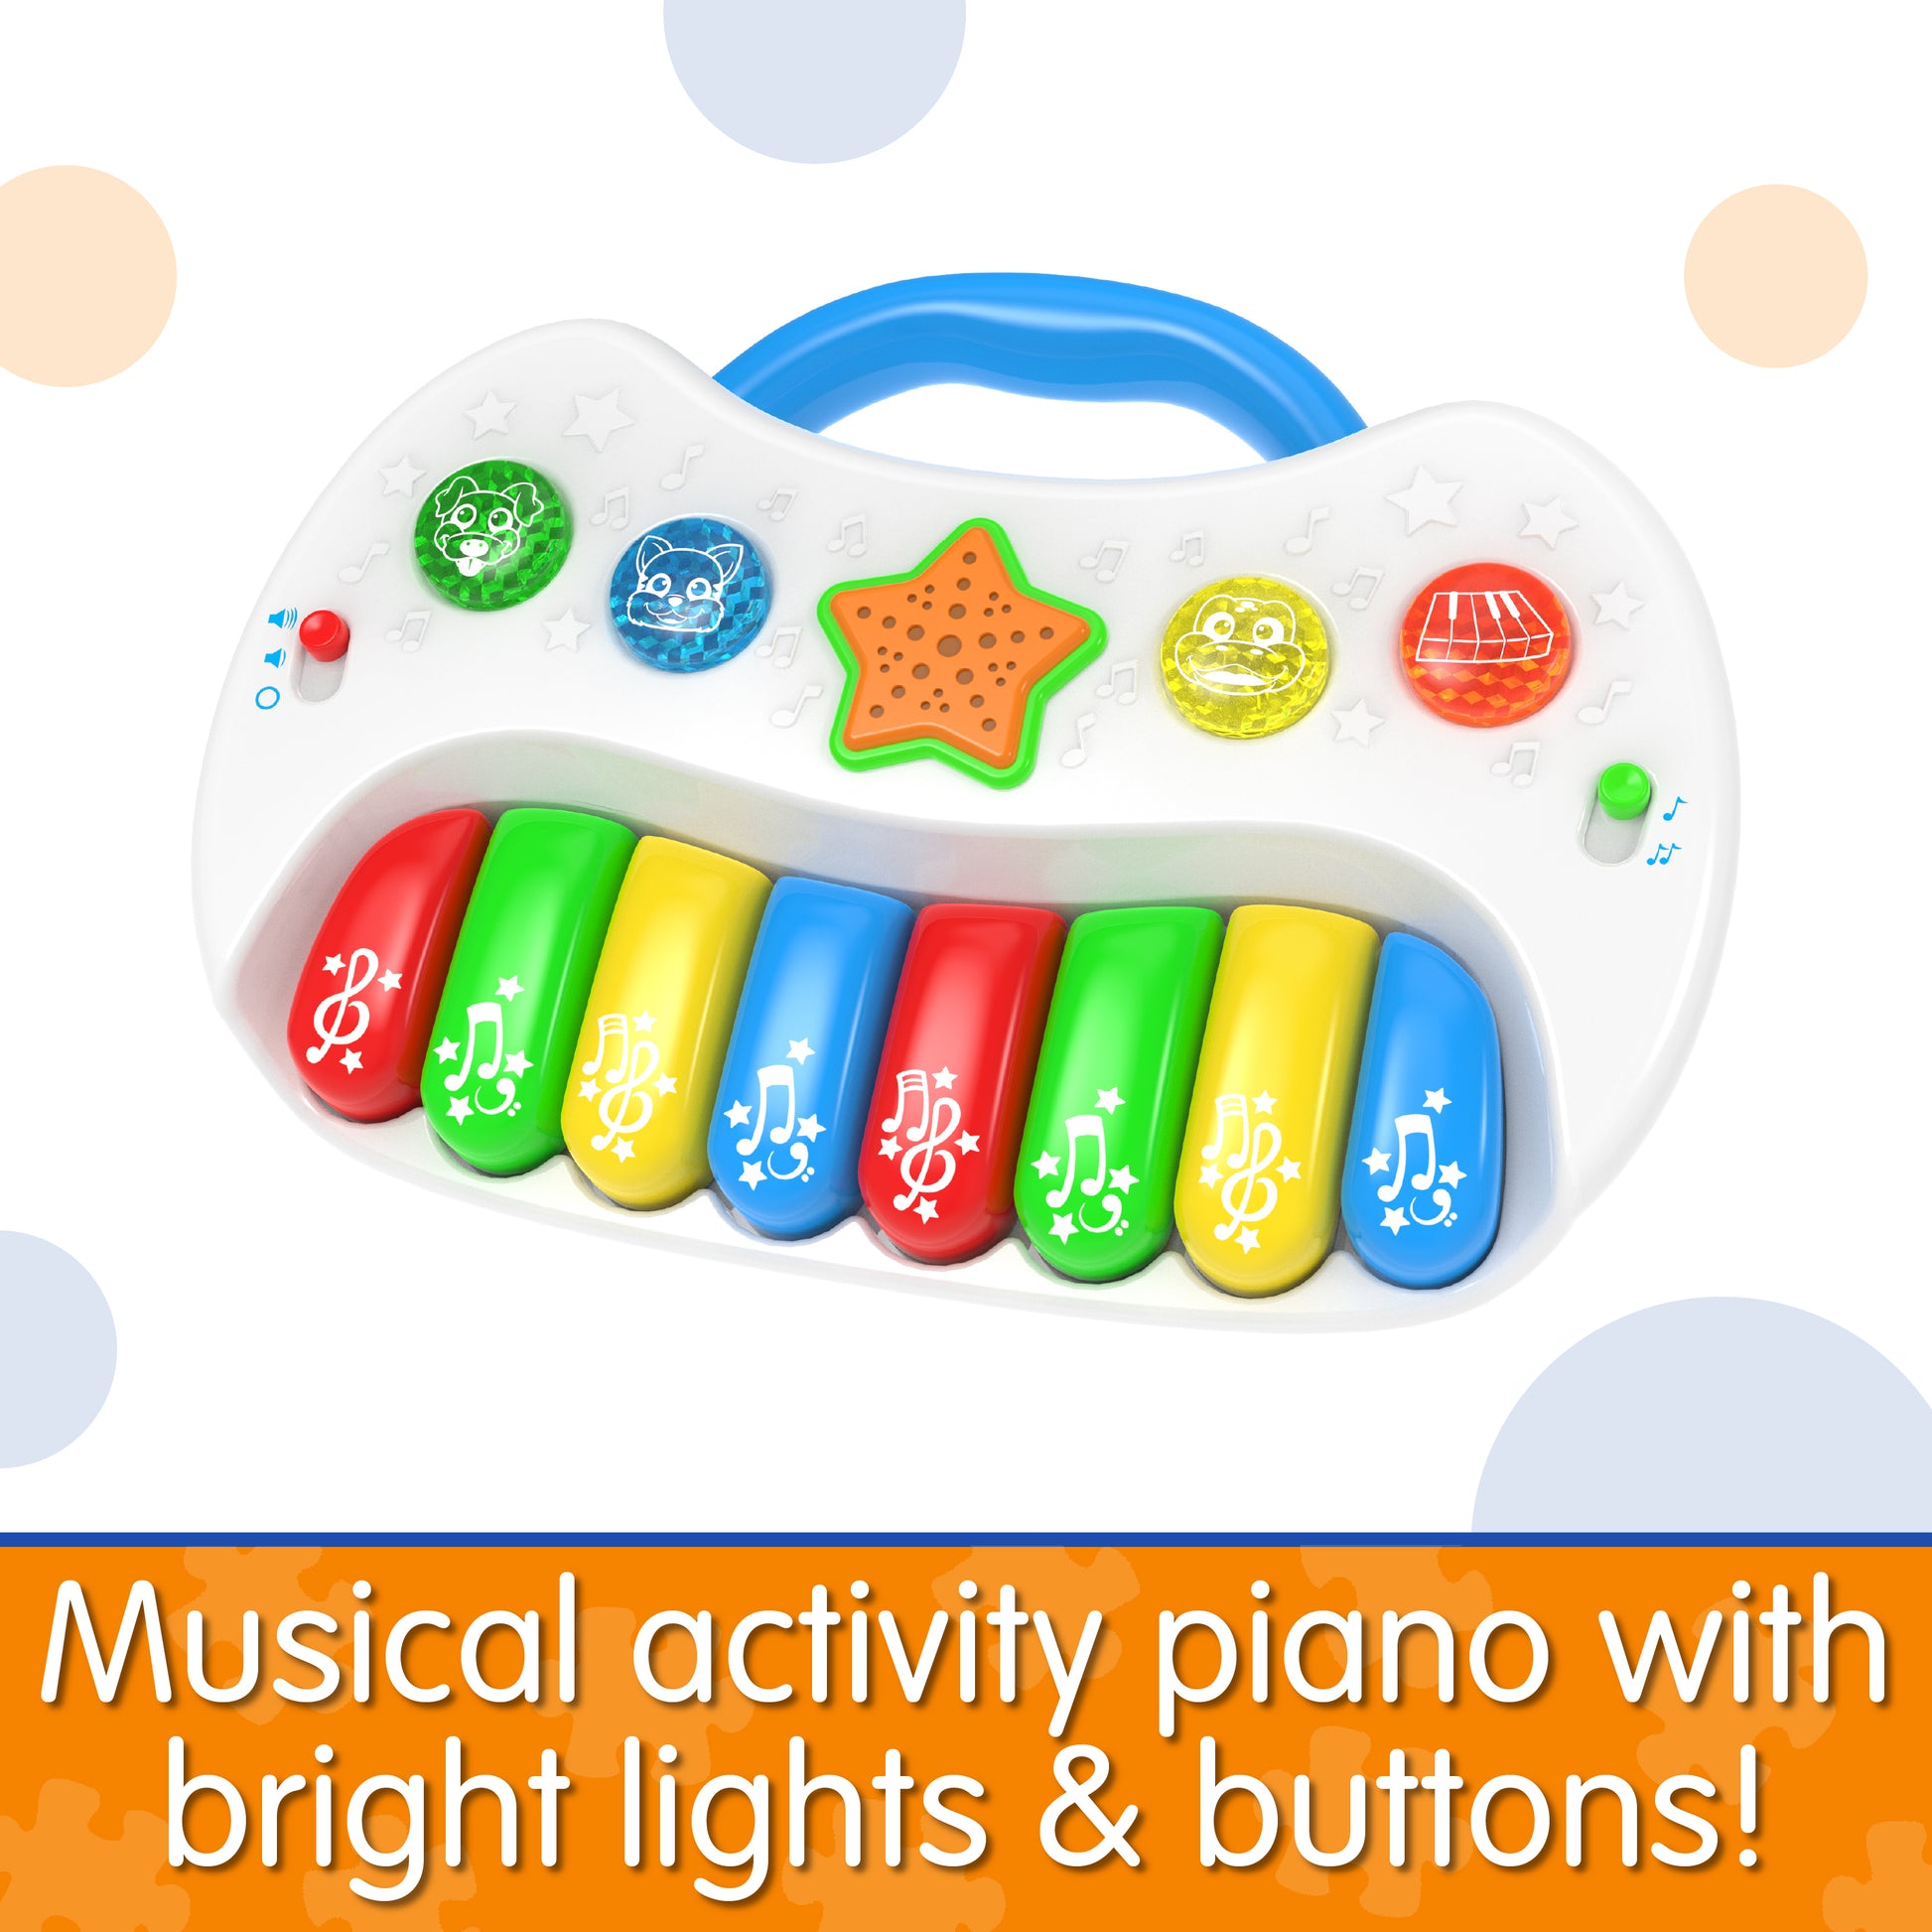 Infographic of Little Piano Tunes that says, "Musical activity piano with bright lights and buttons!"